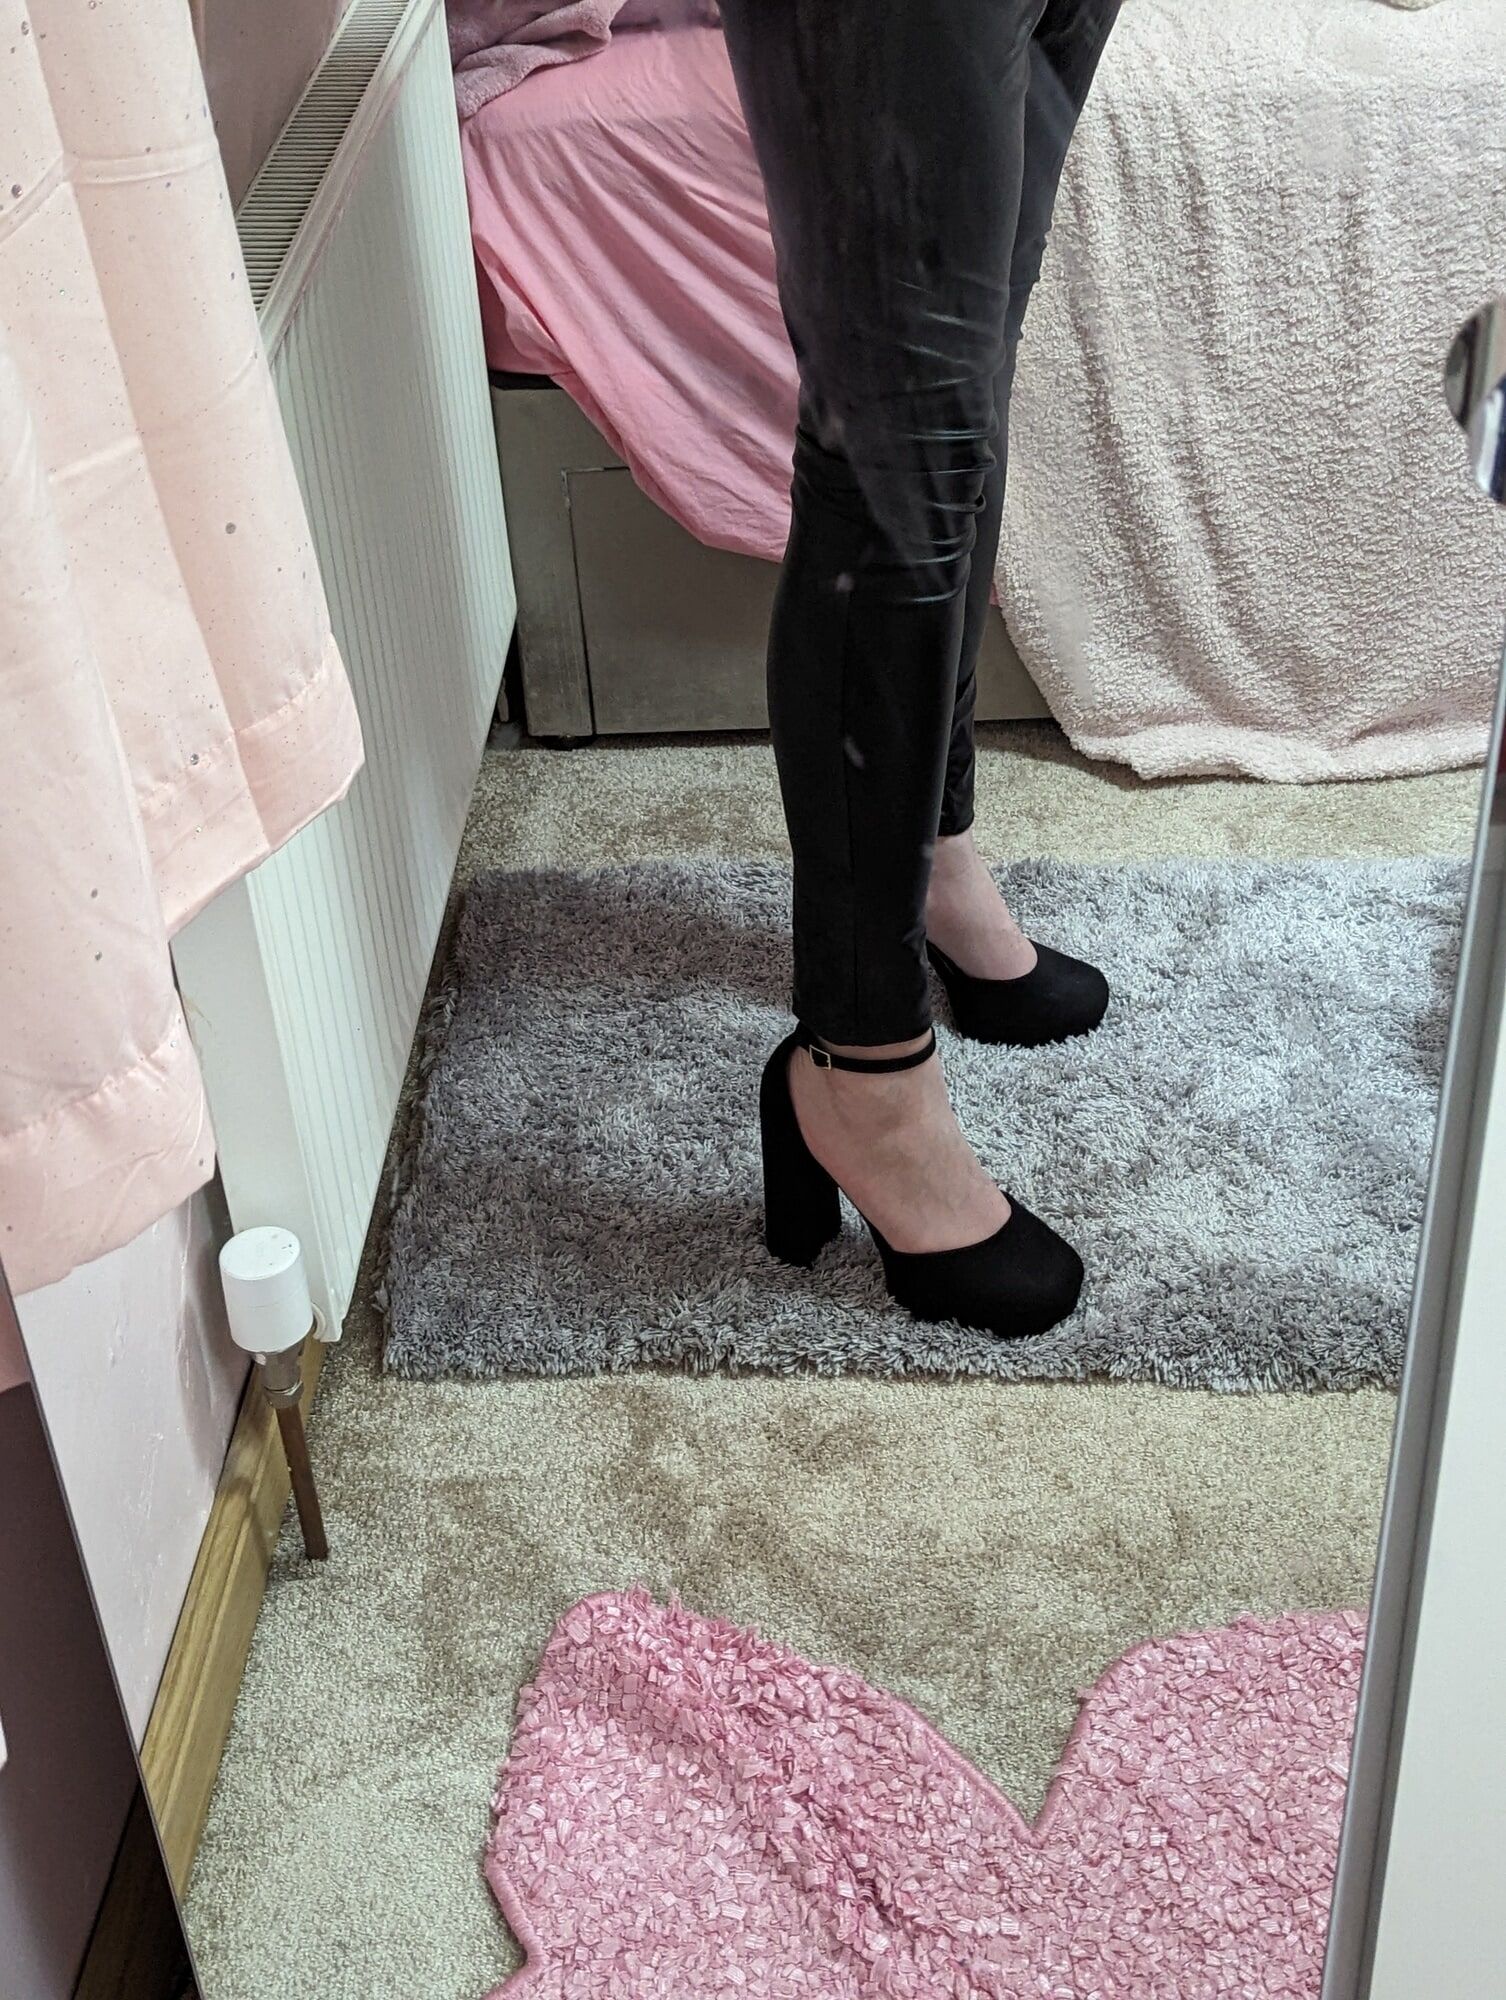 New 5 inch heels and tight shiny leggings #5